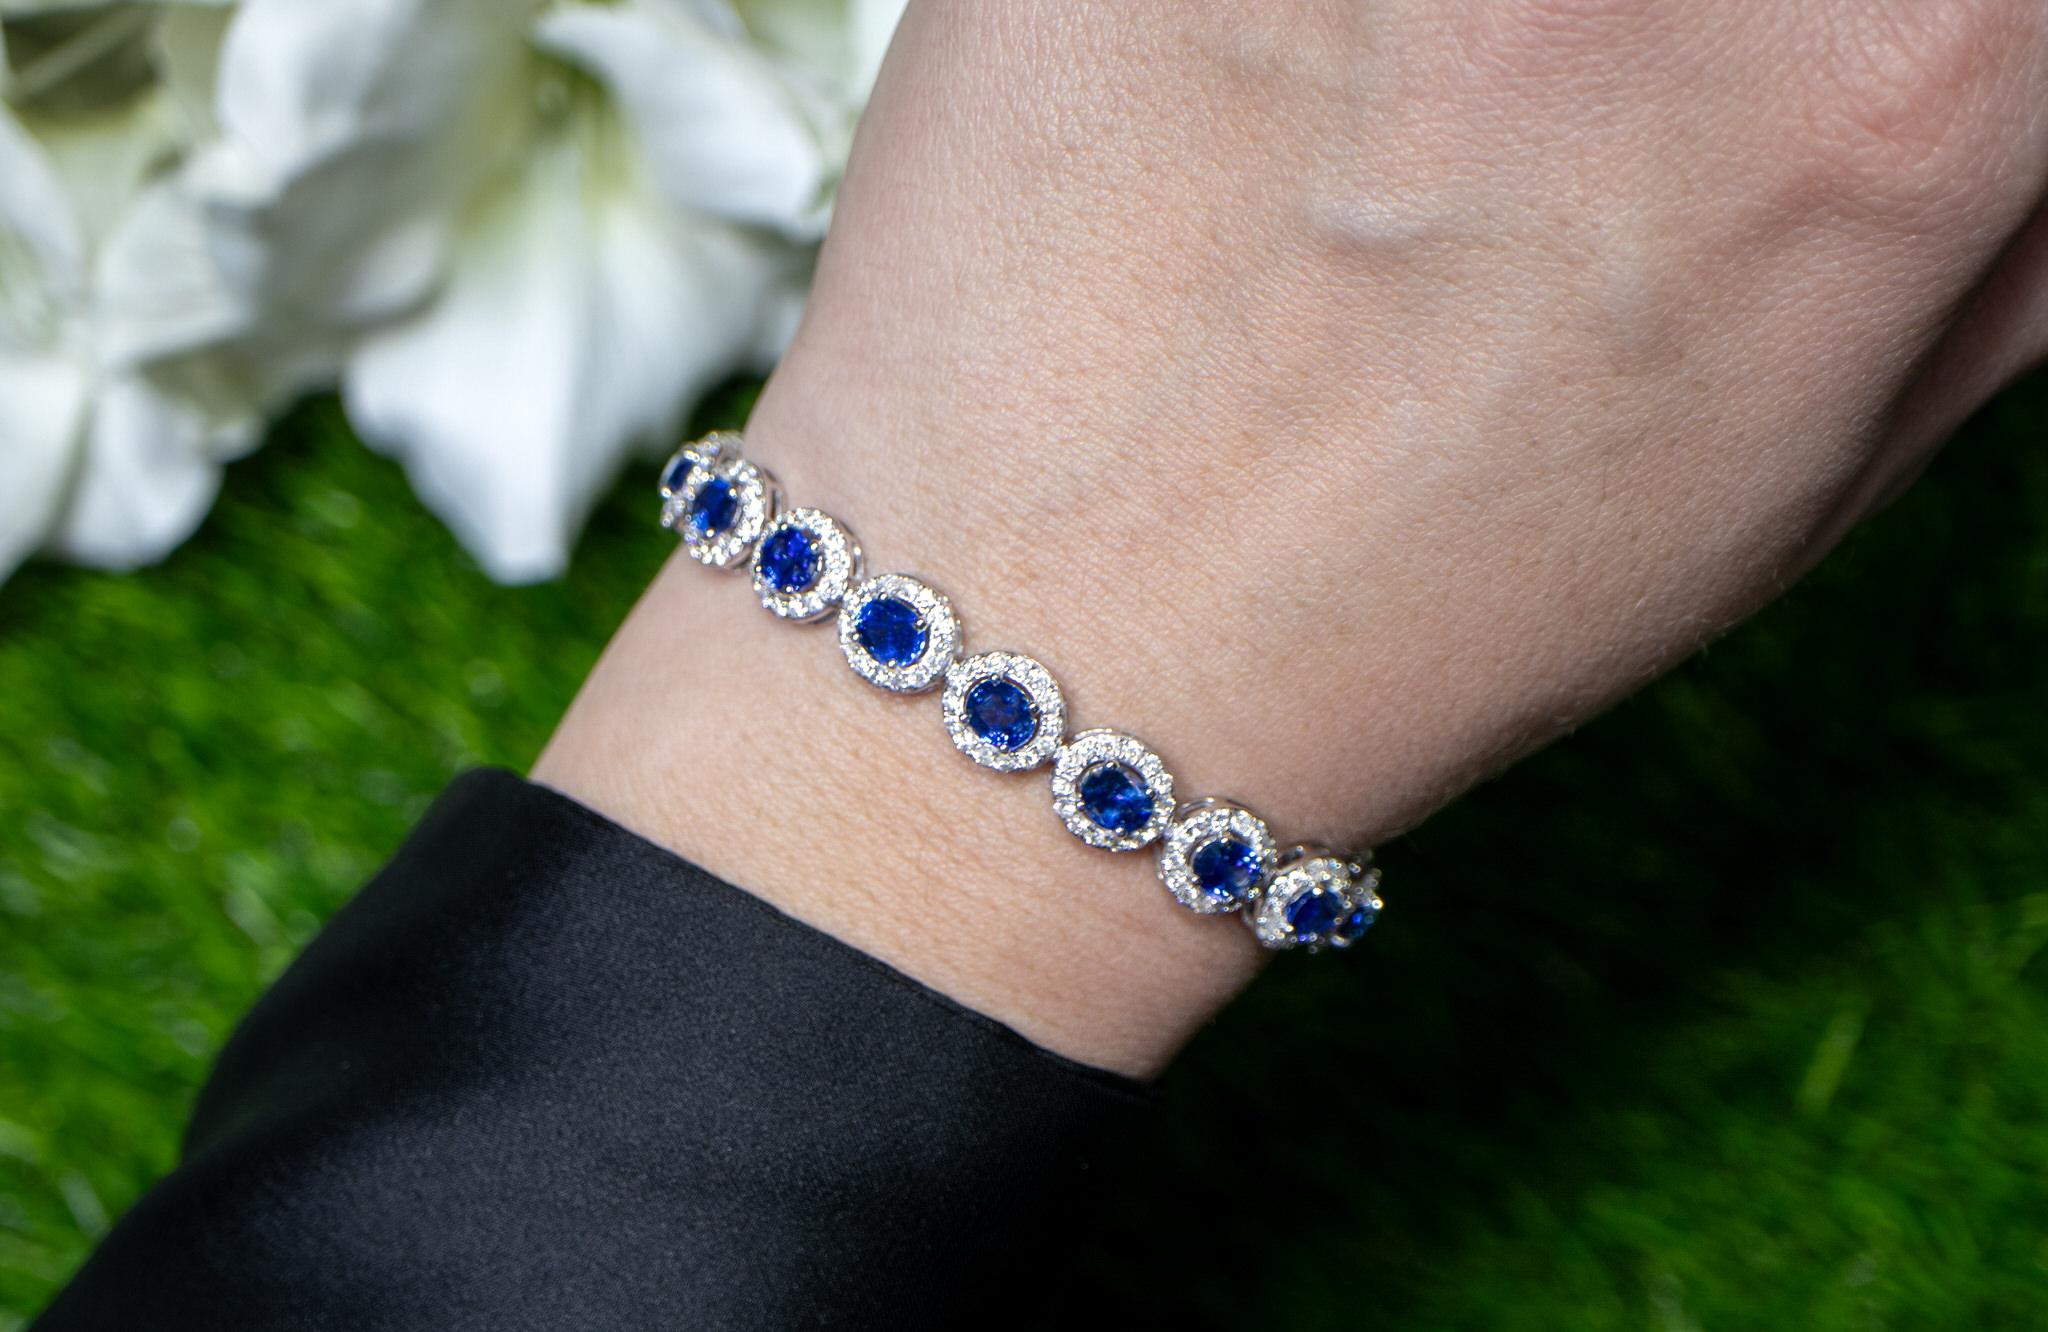 It comes with the Gemological Appraisal by GIA GG/AJP
All Gemstones are Natural
Blue Sapphires = 11.26 Carats
Diamonds = 3.44 Carats
Metal: 18K White Gold
Length: 7.25 Inches
Width: 0.33 Inches